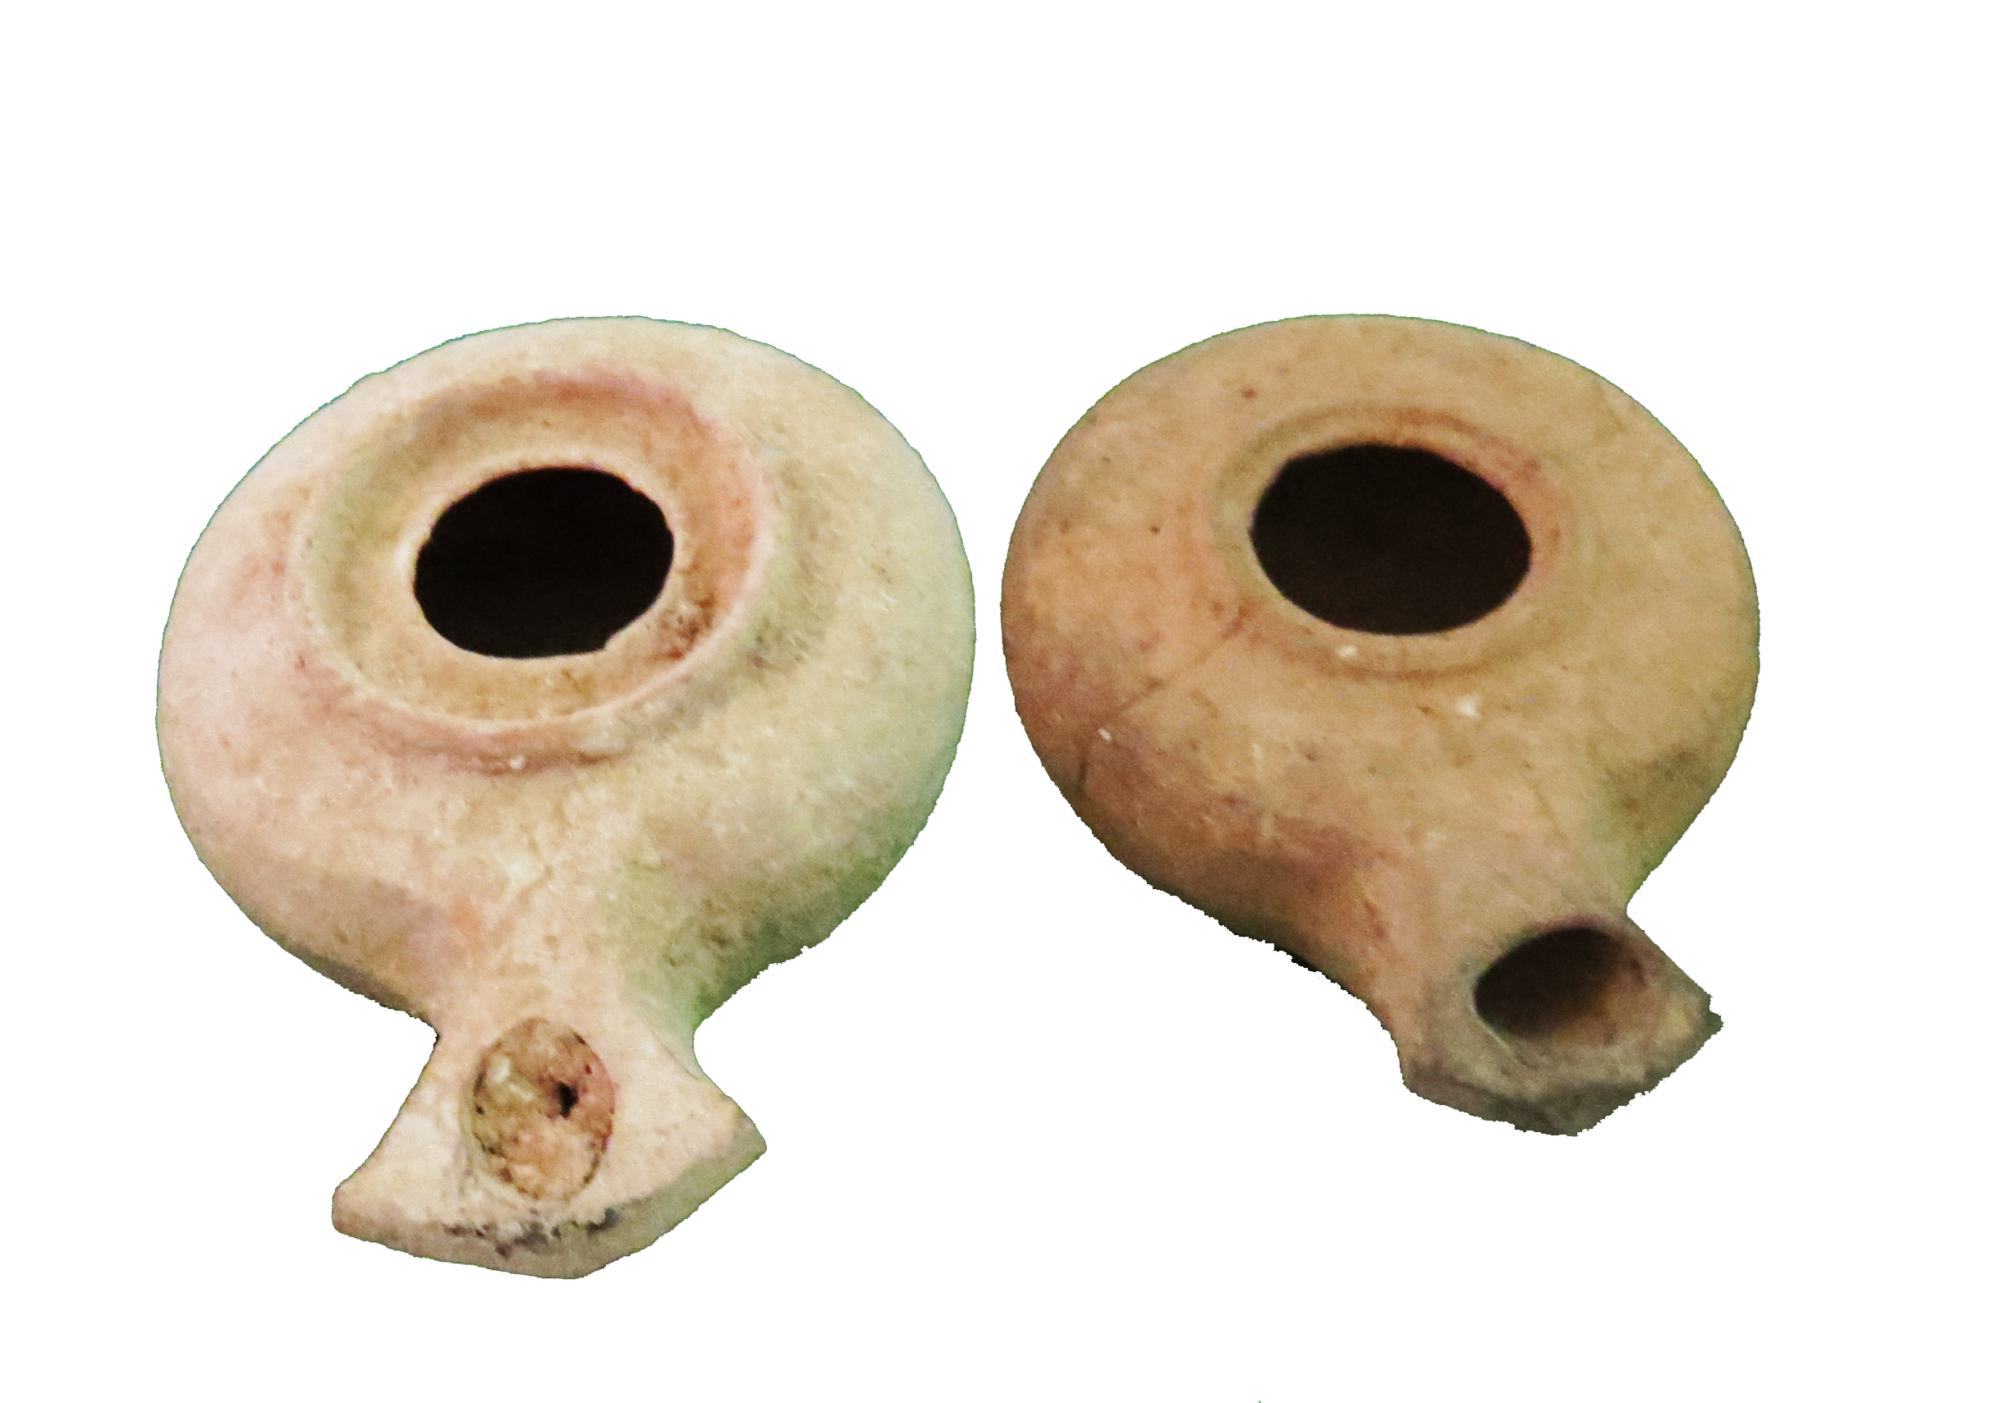 Terracotta oil lamps from the Herodian period